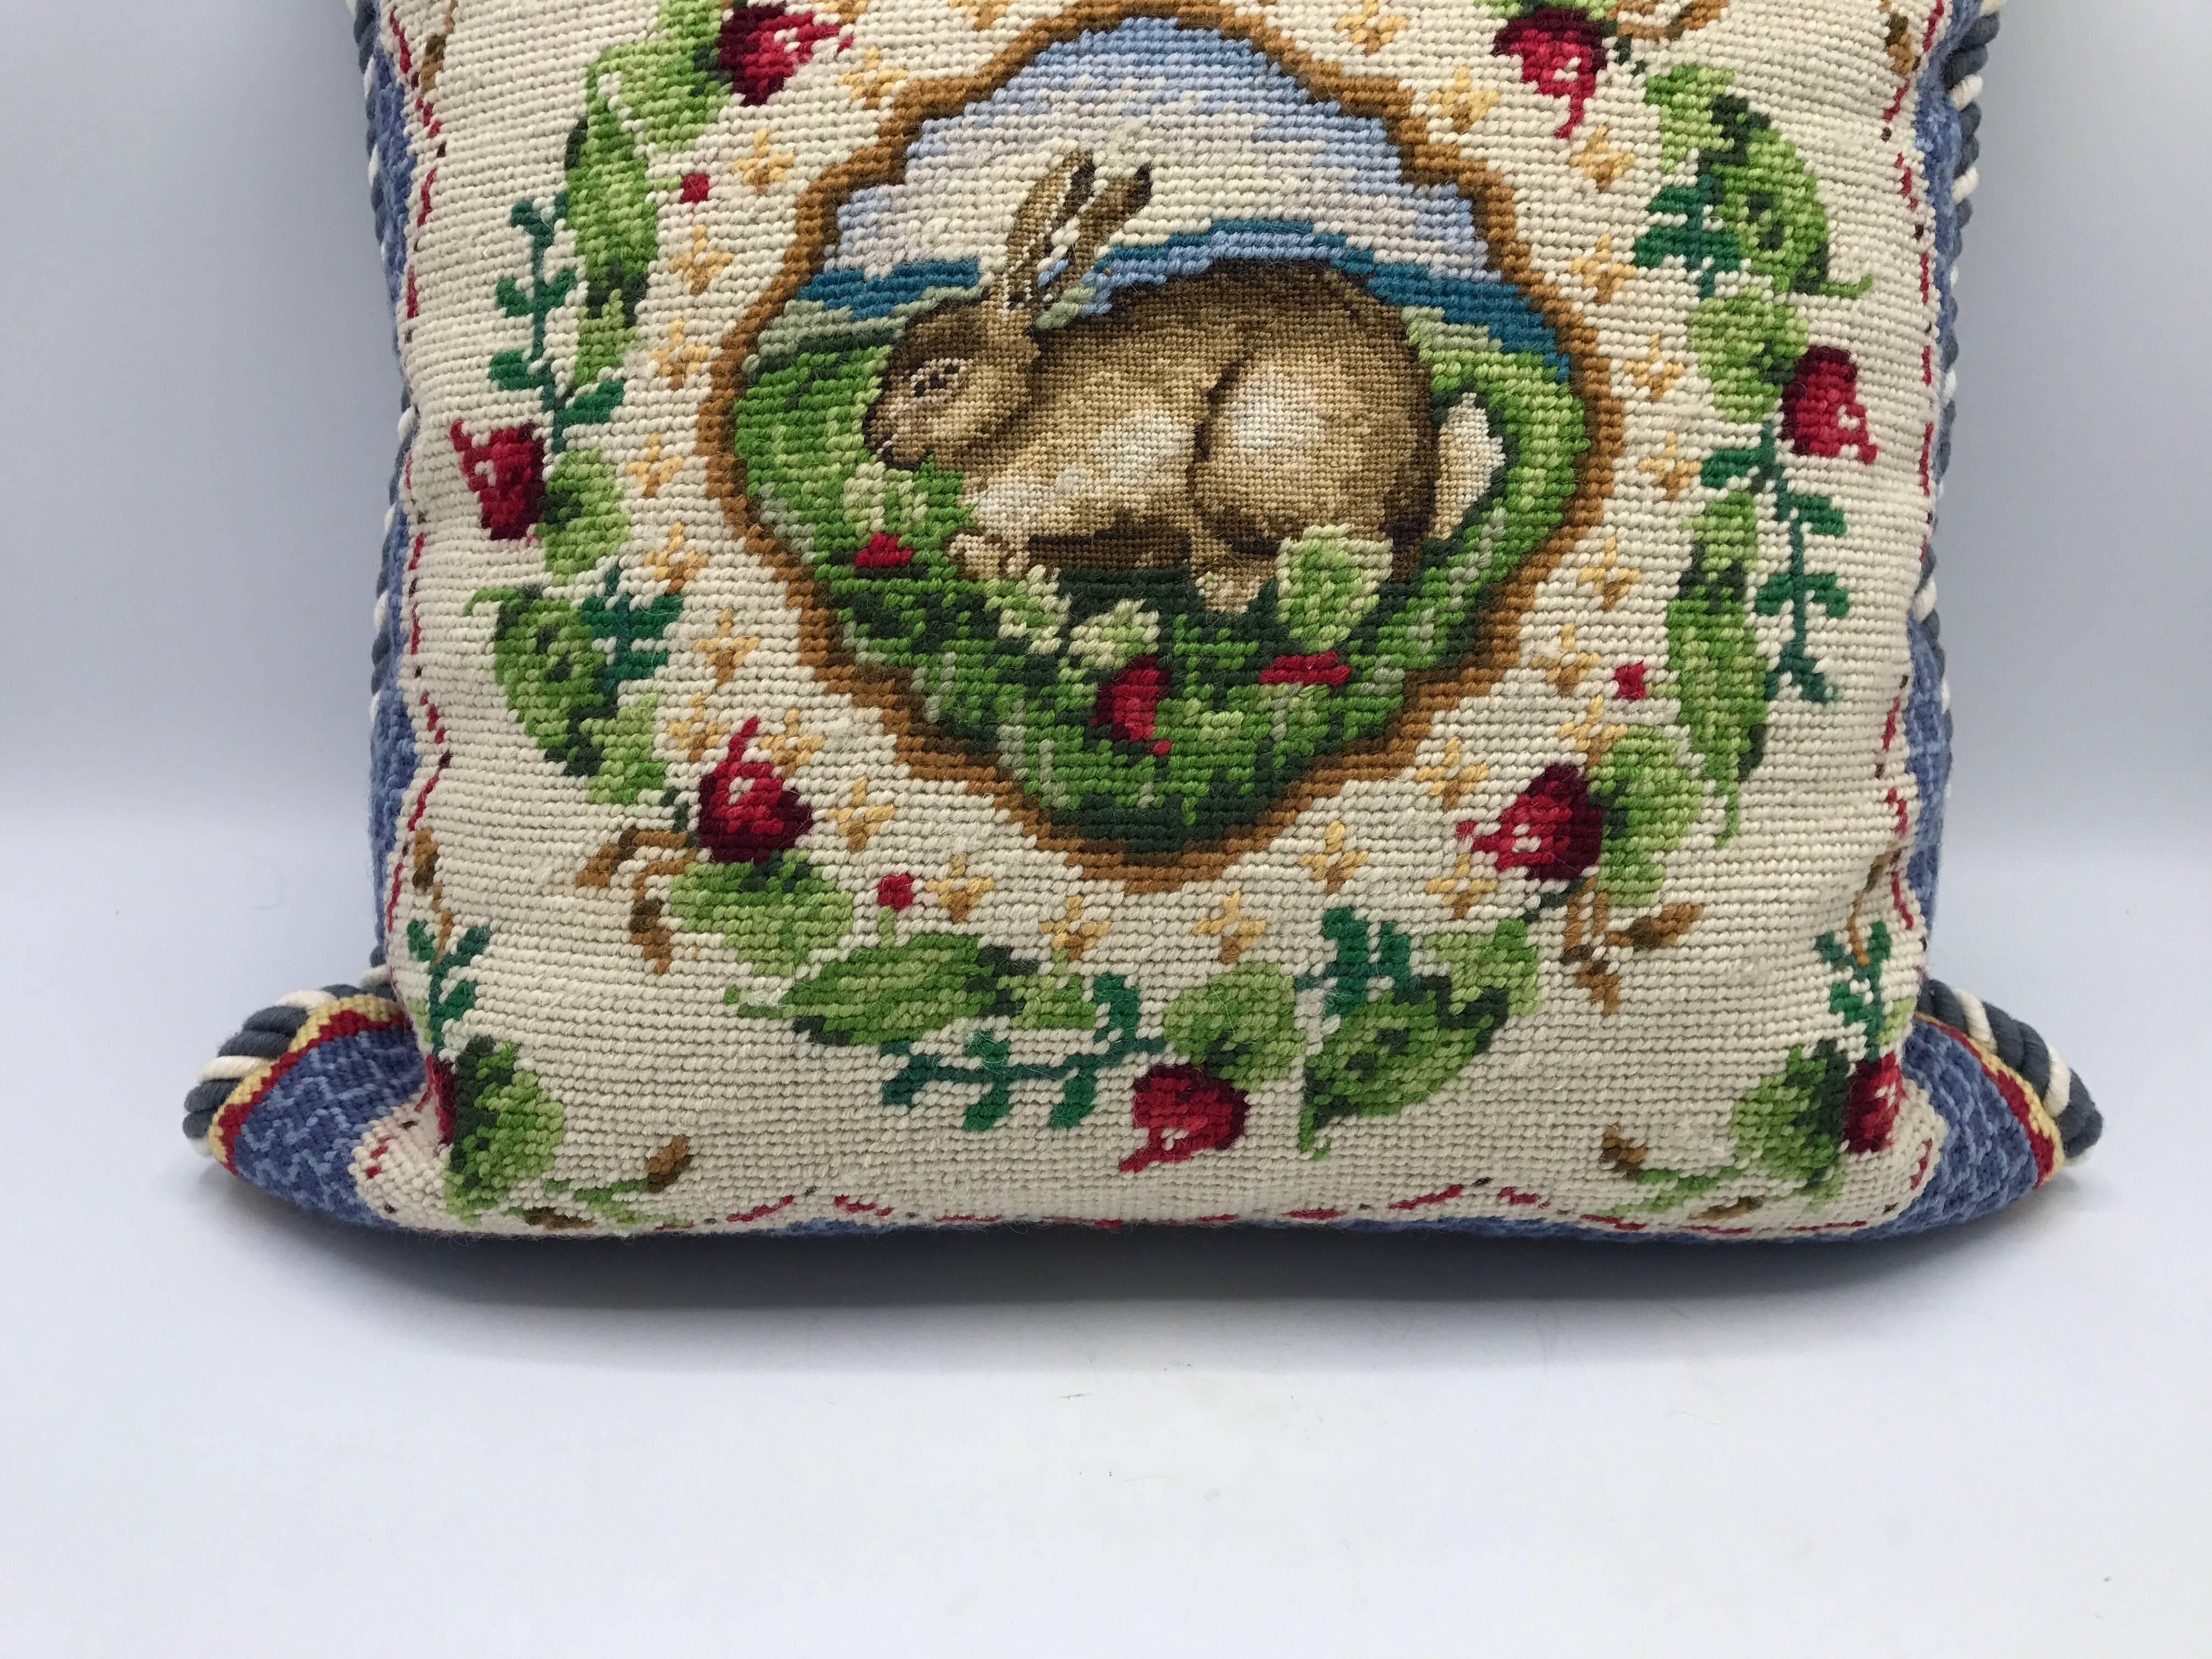 American Classical Blue and White Needlepoint Pillow with Floral and Rabbit-Hare Motif, 1960s For Sale